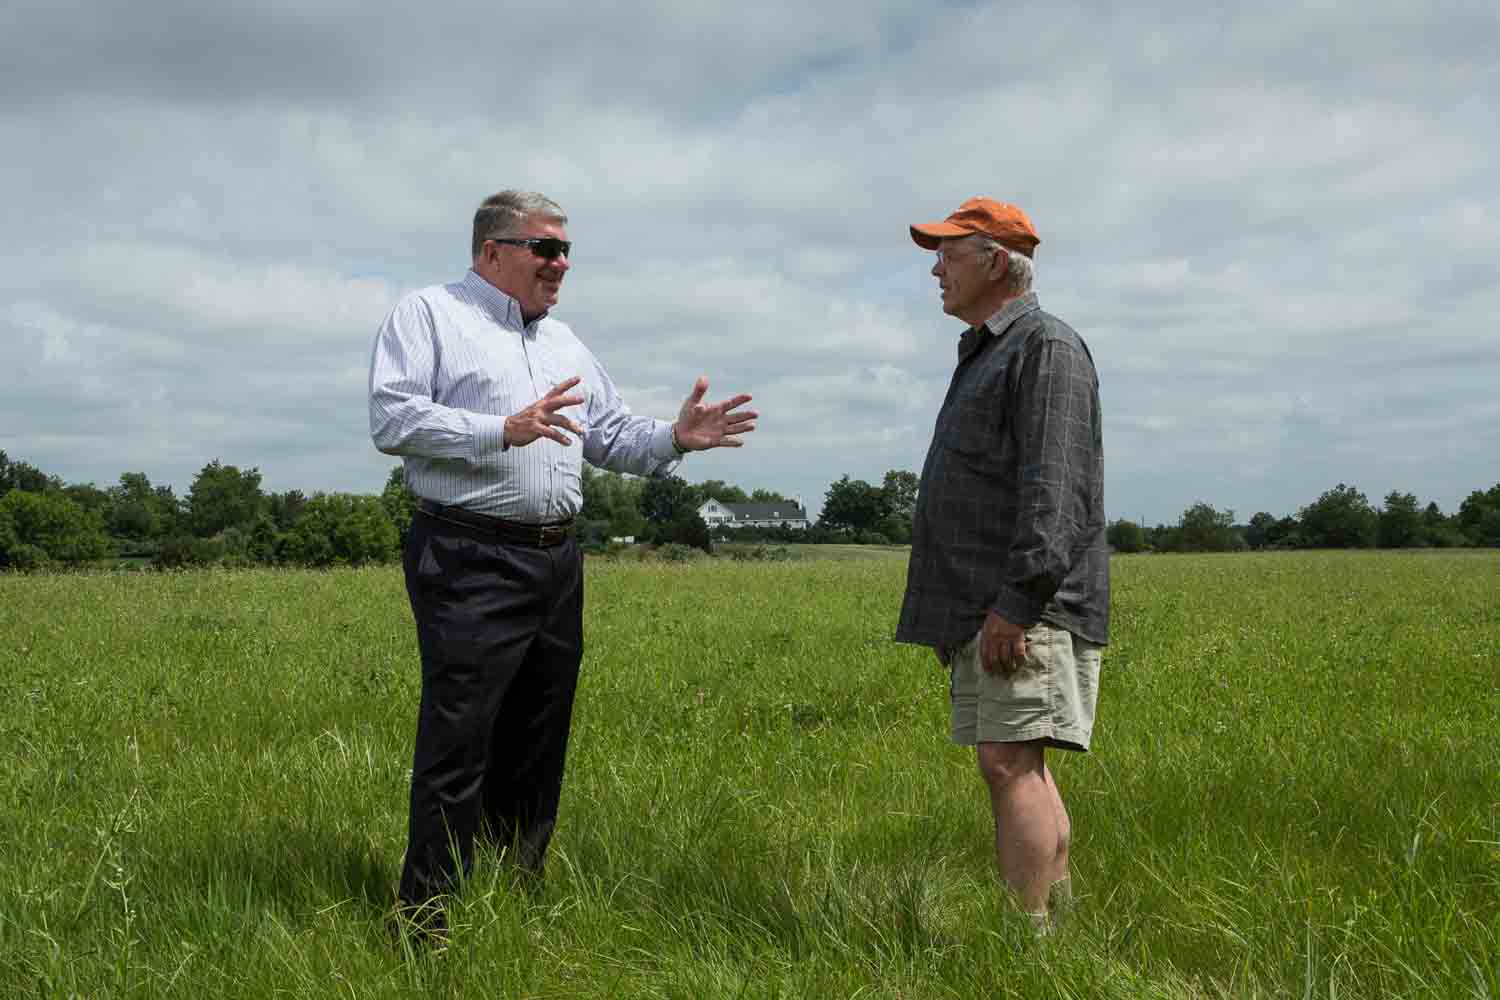 A financial advisor and his client in a field photographed for a financial services firm.